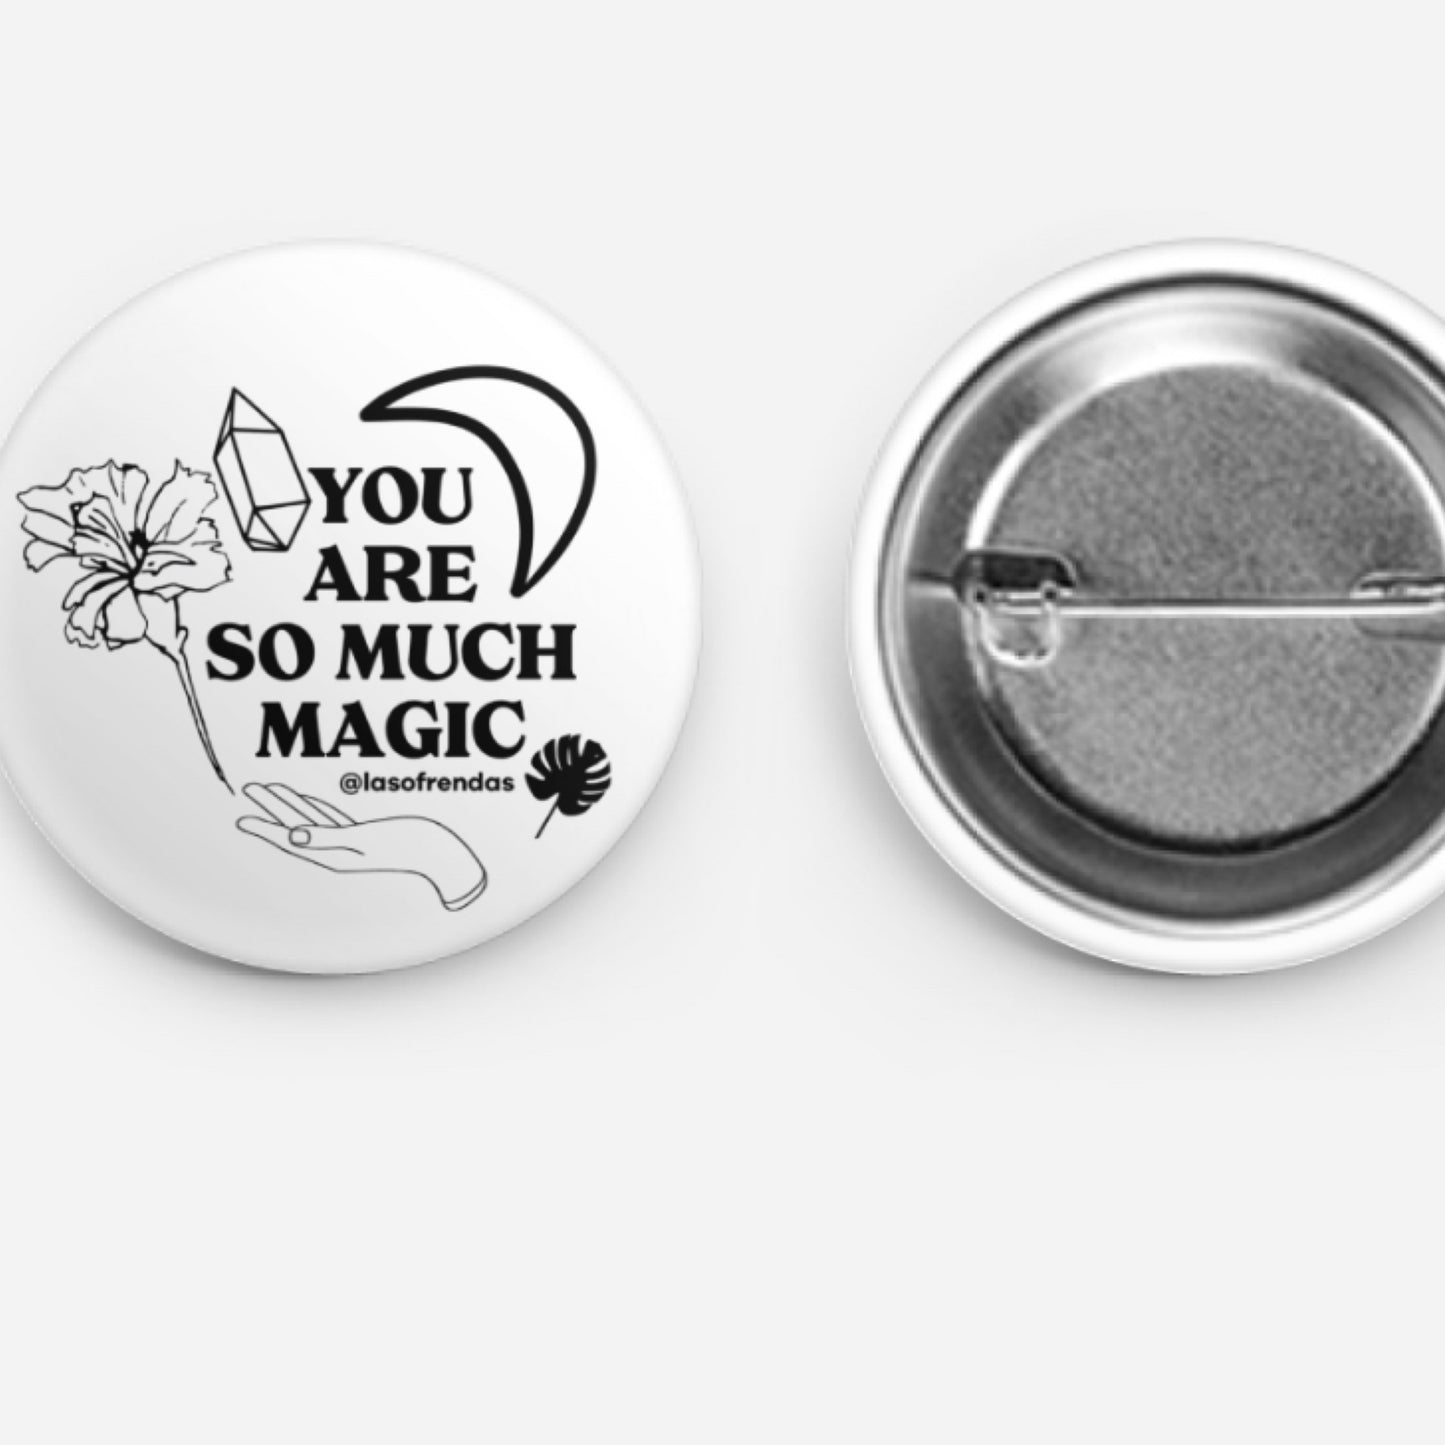 You are so much magic button